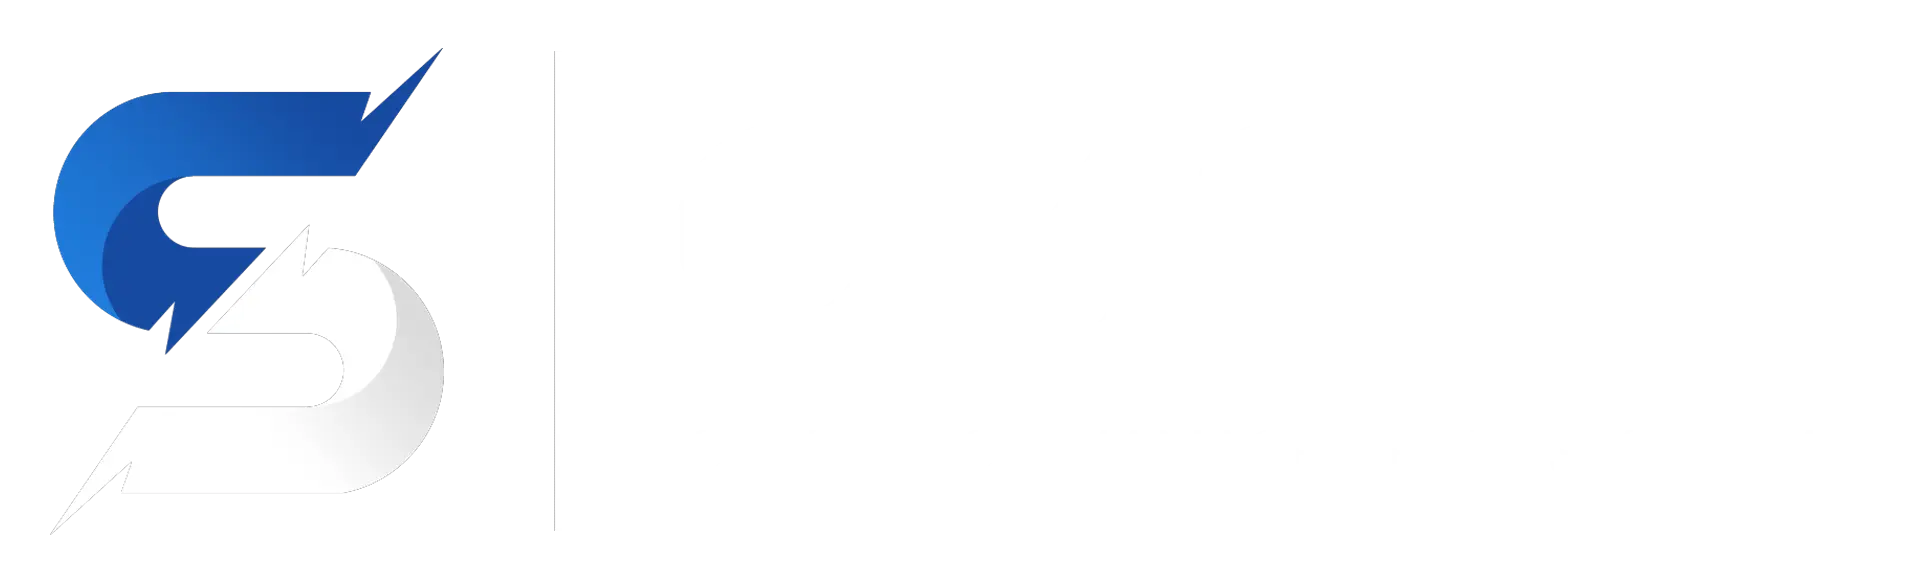 Contract Managment System